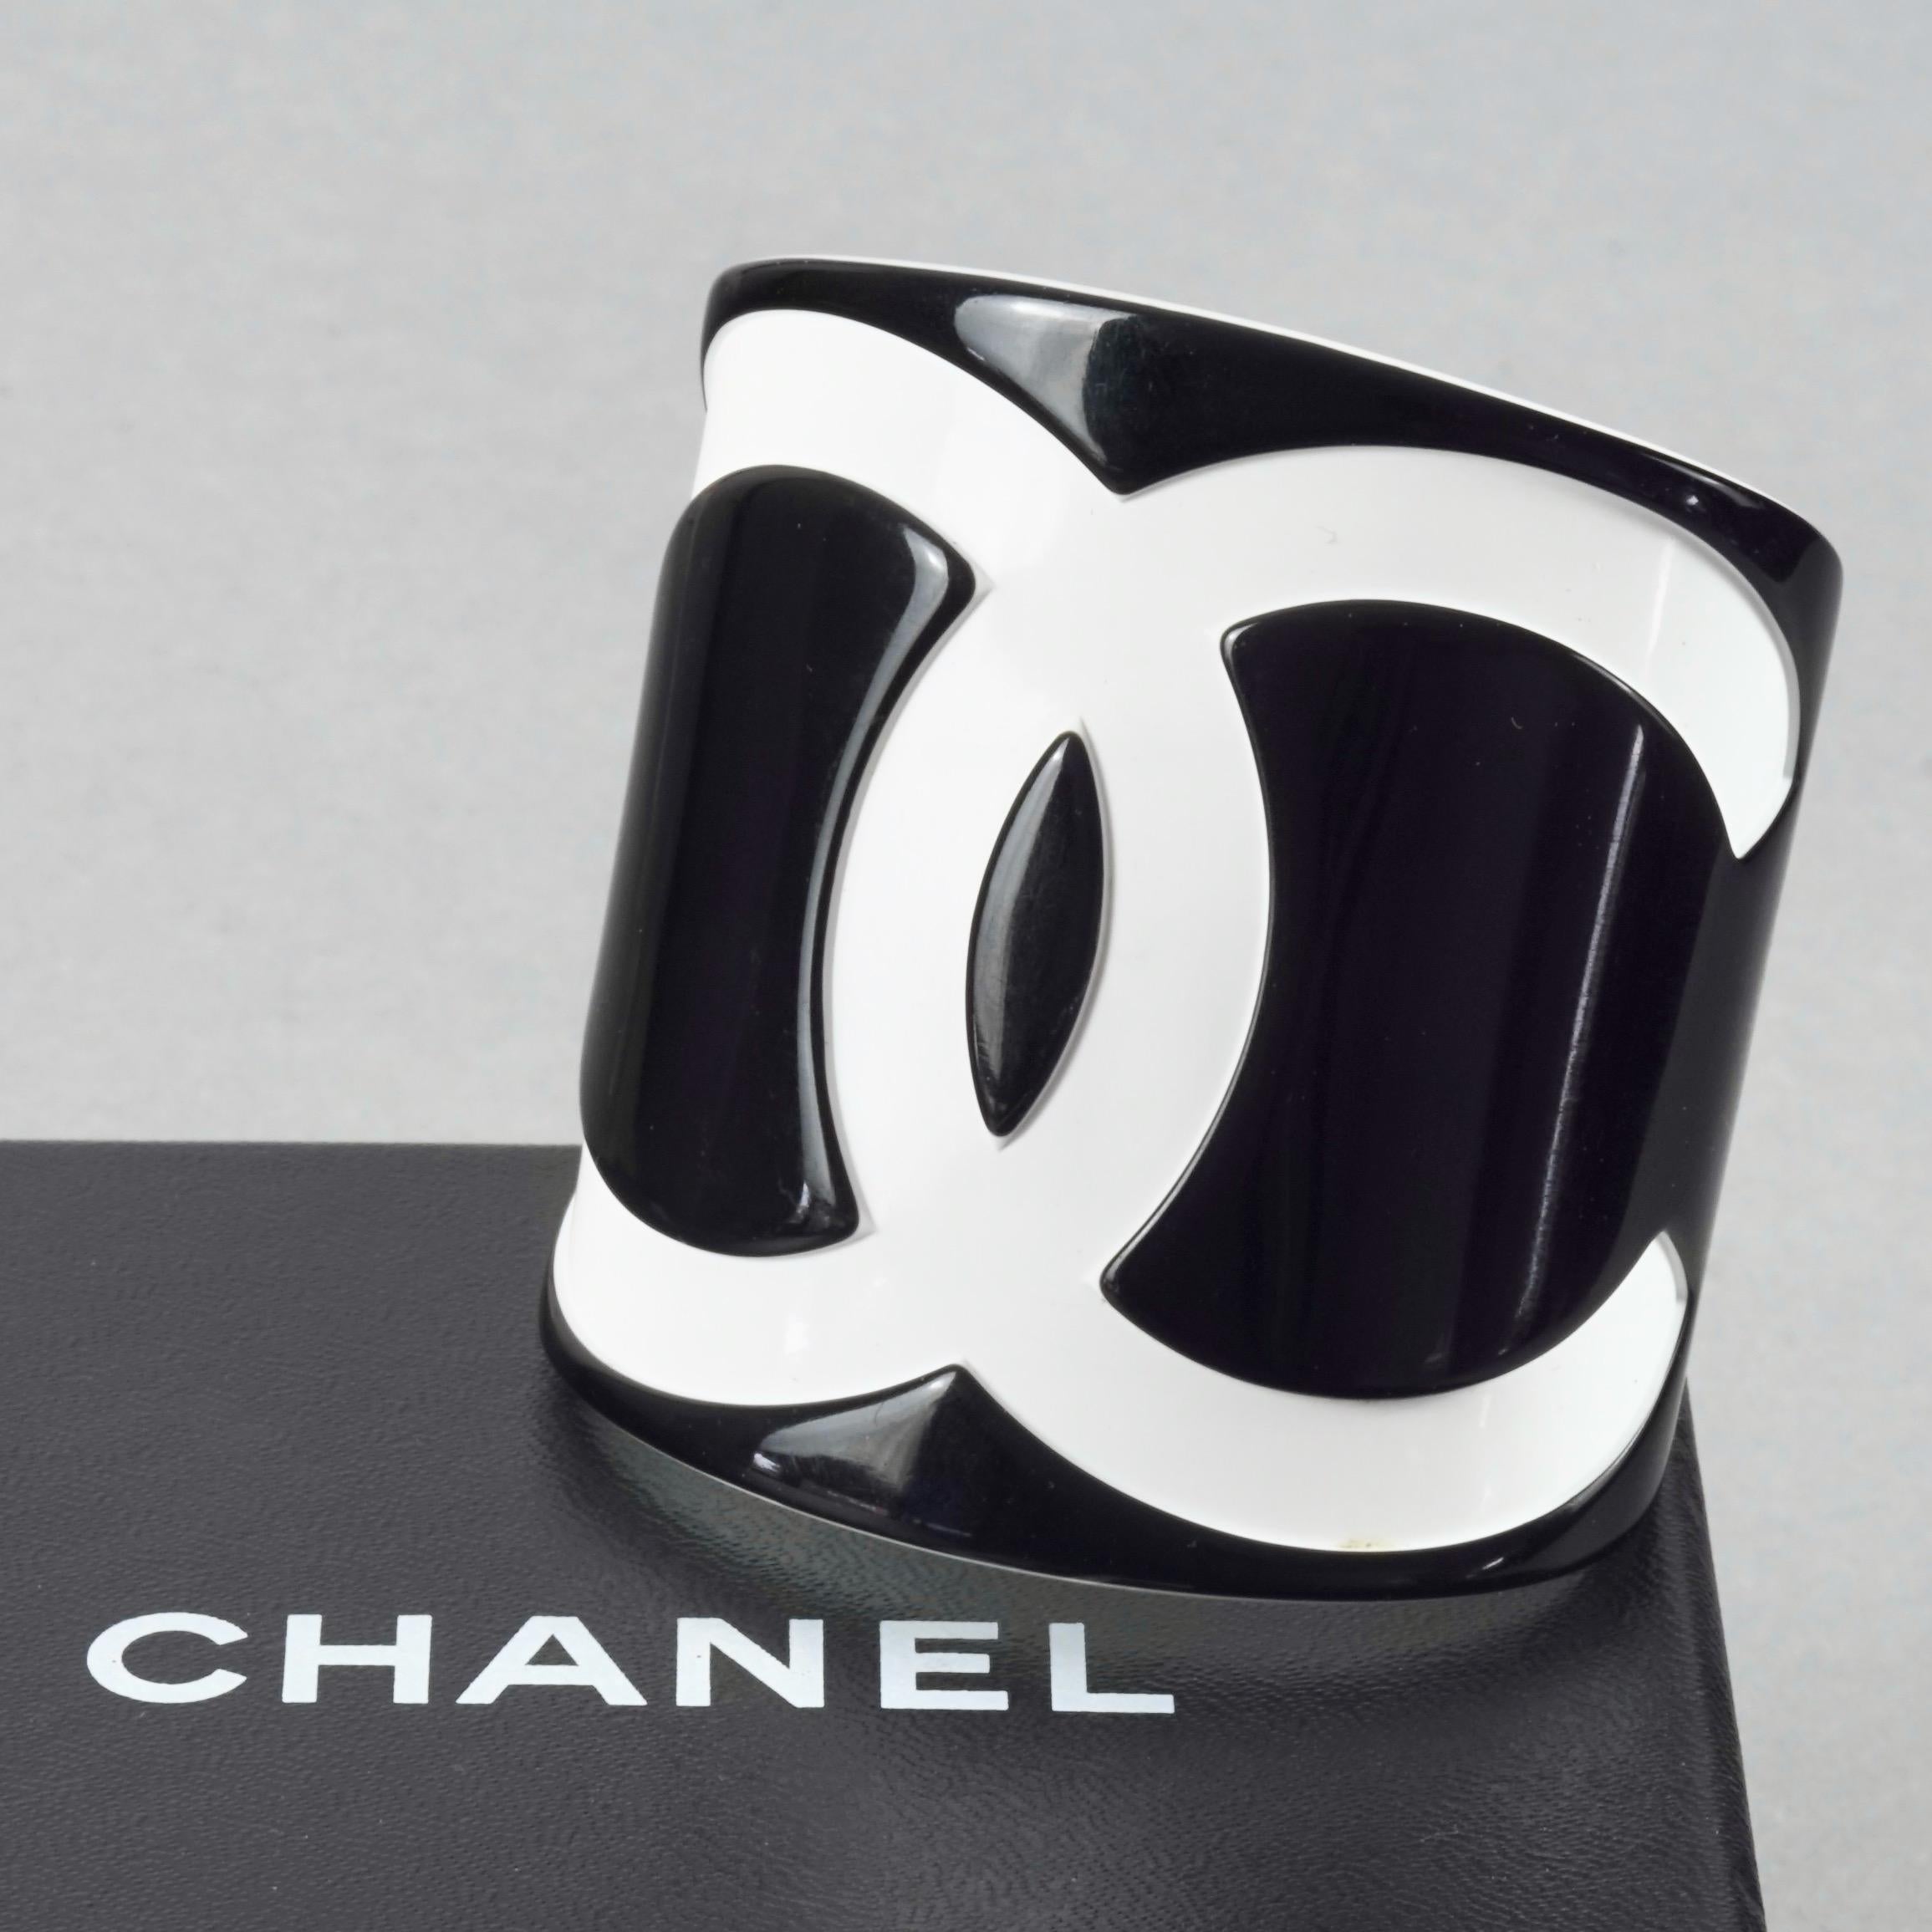 2006 CHANEL CC Logo Black and White Perspex Wide Cuff Bracelet

Measurements:
Height: 2.55 inches (6.5 cm)
Inner Circumference: 5.78 inches (14.7 cm) including opening
Inner Horizontal Diameter: 2.16 inches (5.5 cm)
Inner Vertical Diameter: 1.65